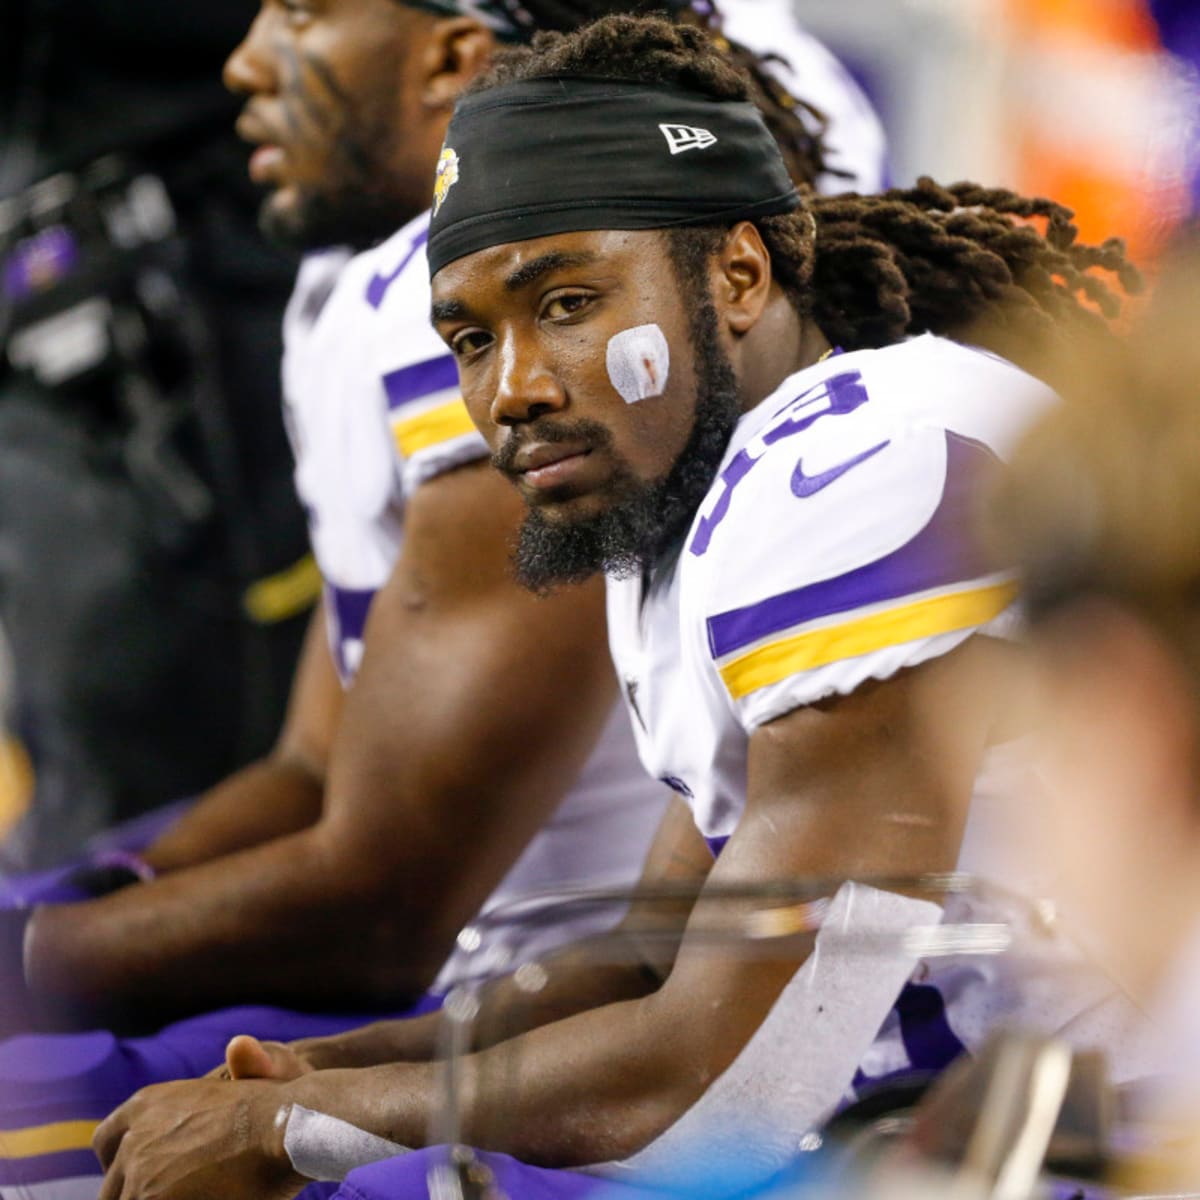 Dalvin Cook Appears To Make Decision On Jersey Number Change - The